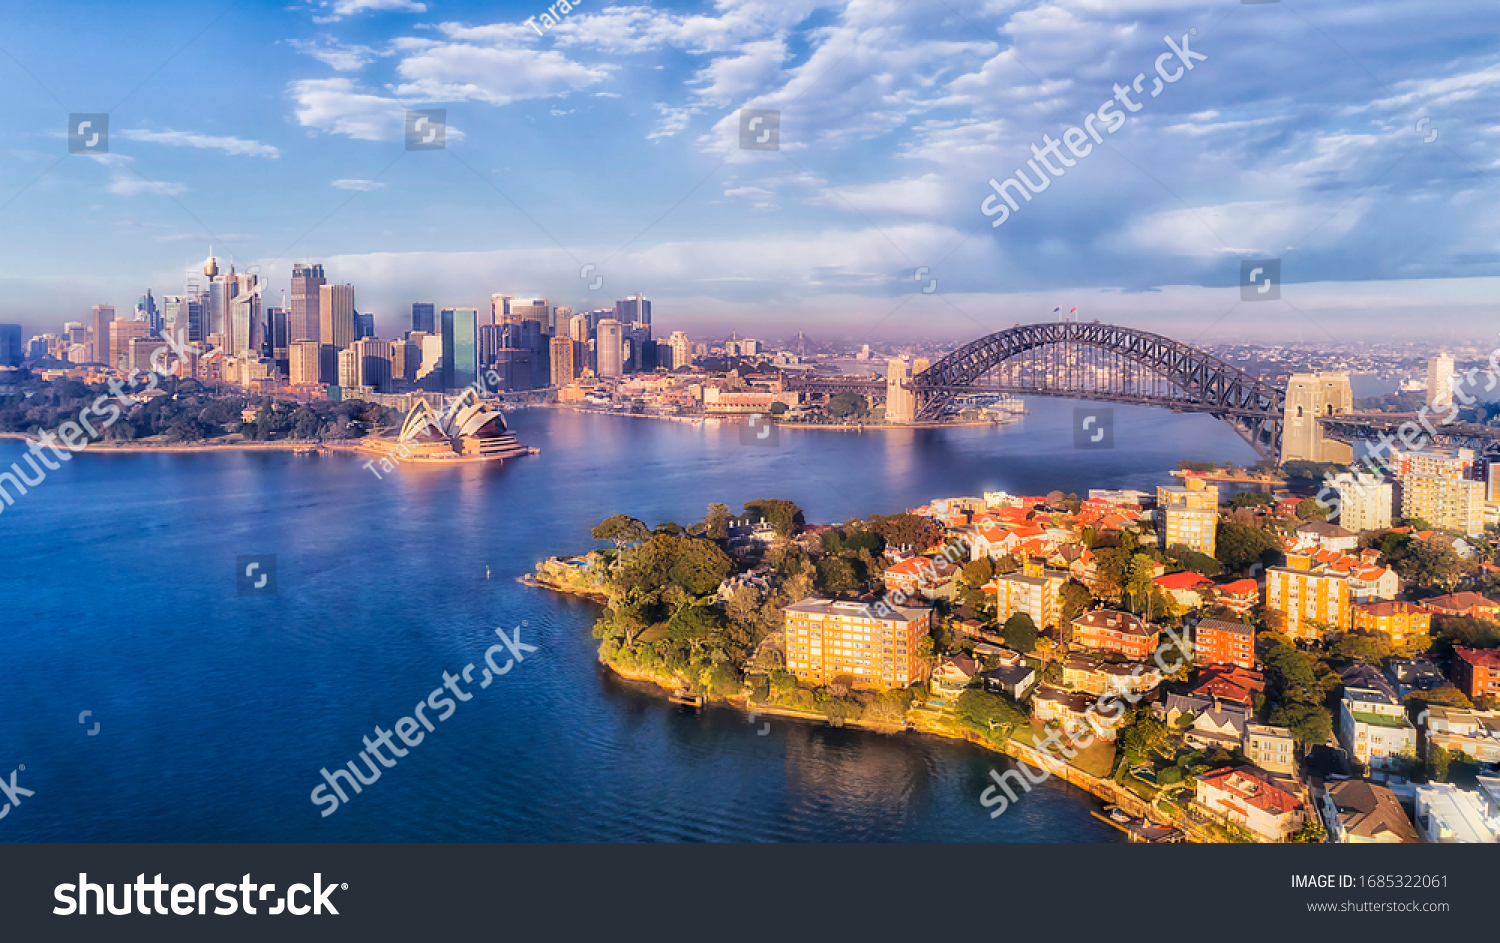 BLue water of Sydney harbour with major city landmarks on waterfront of CBD and north shore in aerial view.